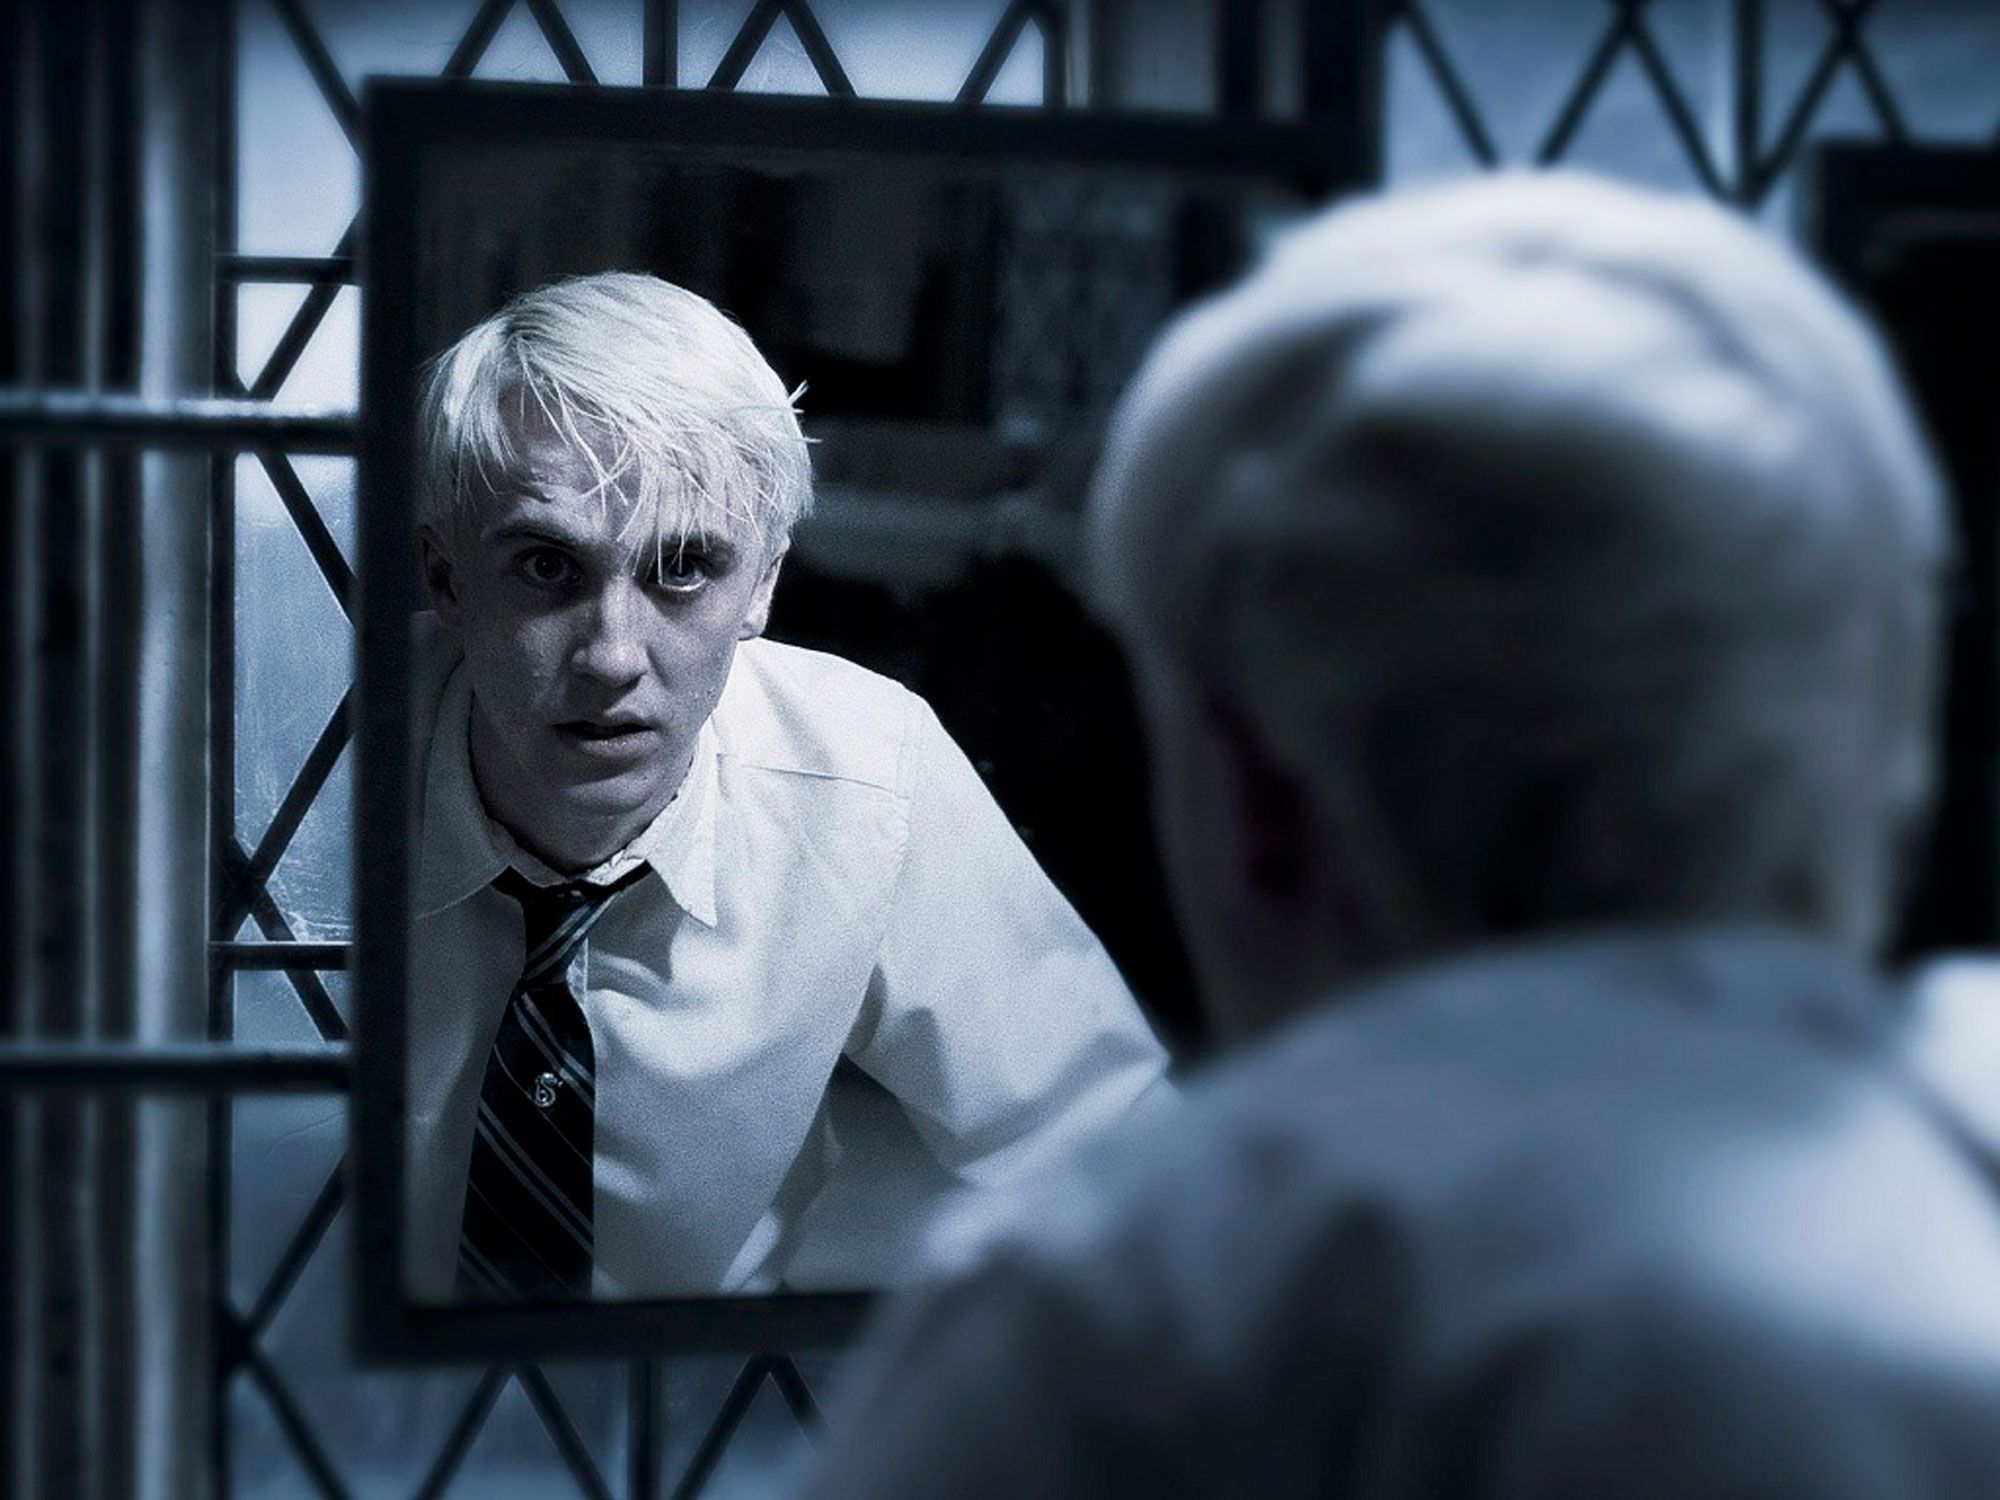 Draco Malfoy stares at himself in the bathroom mirror with a scared expression on his face.